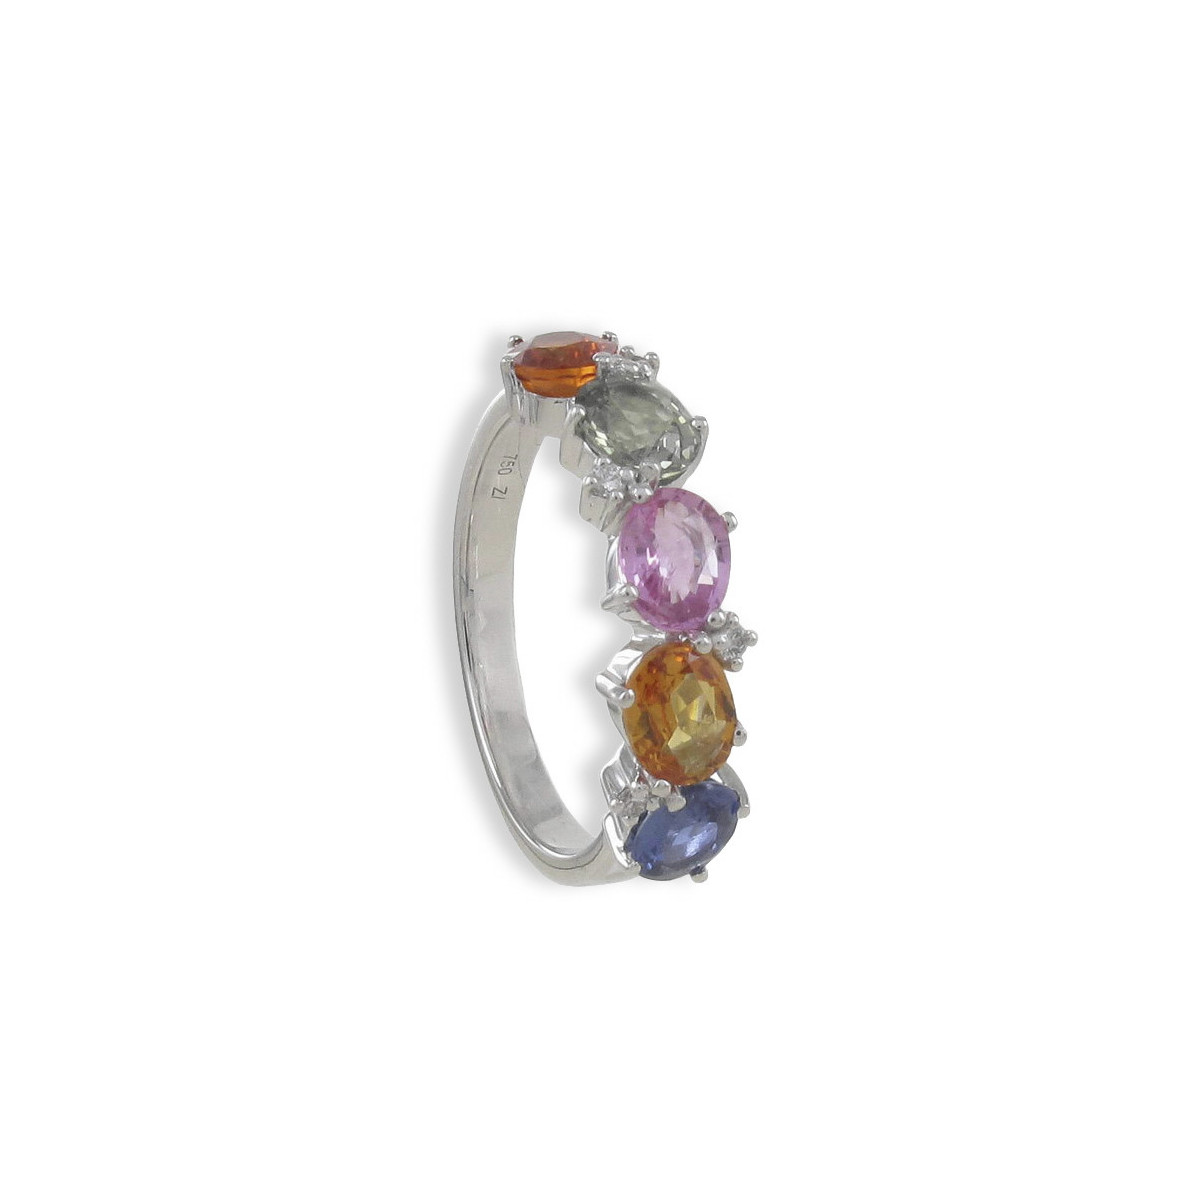 GOLD DIAMONDS AND COLORS SAPPHIRES RING